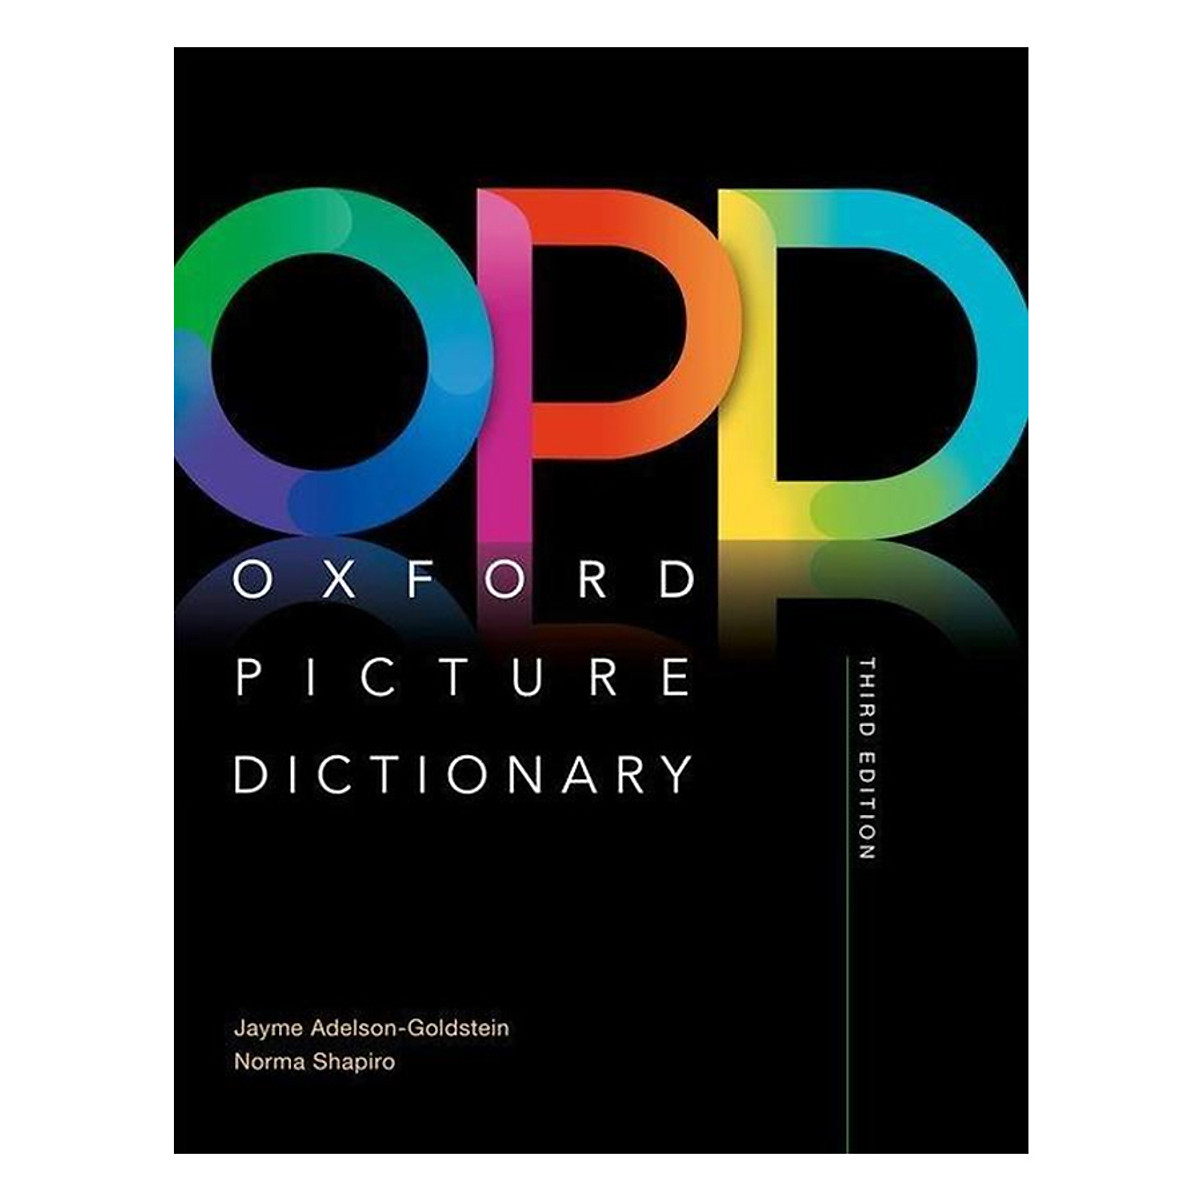 Oxford Picture Dictionary Third Edition English/Spanish Dictionary